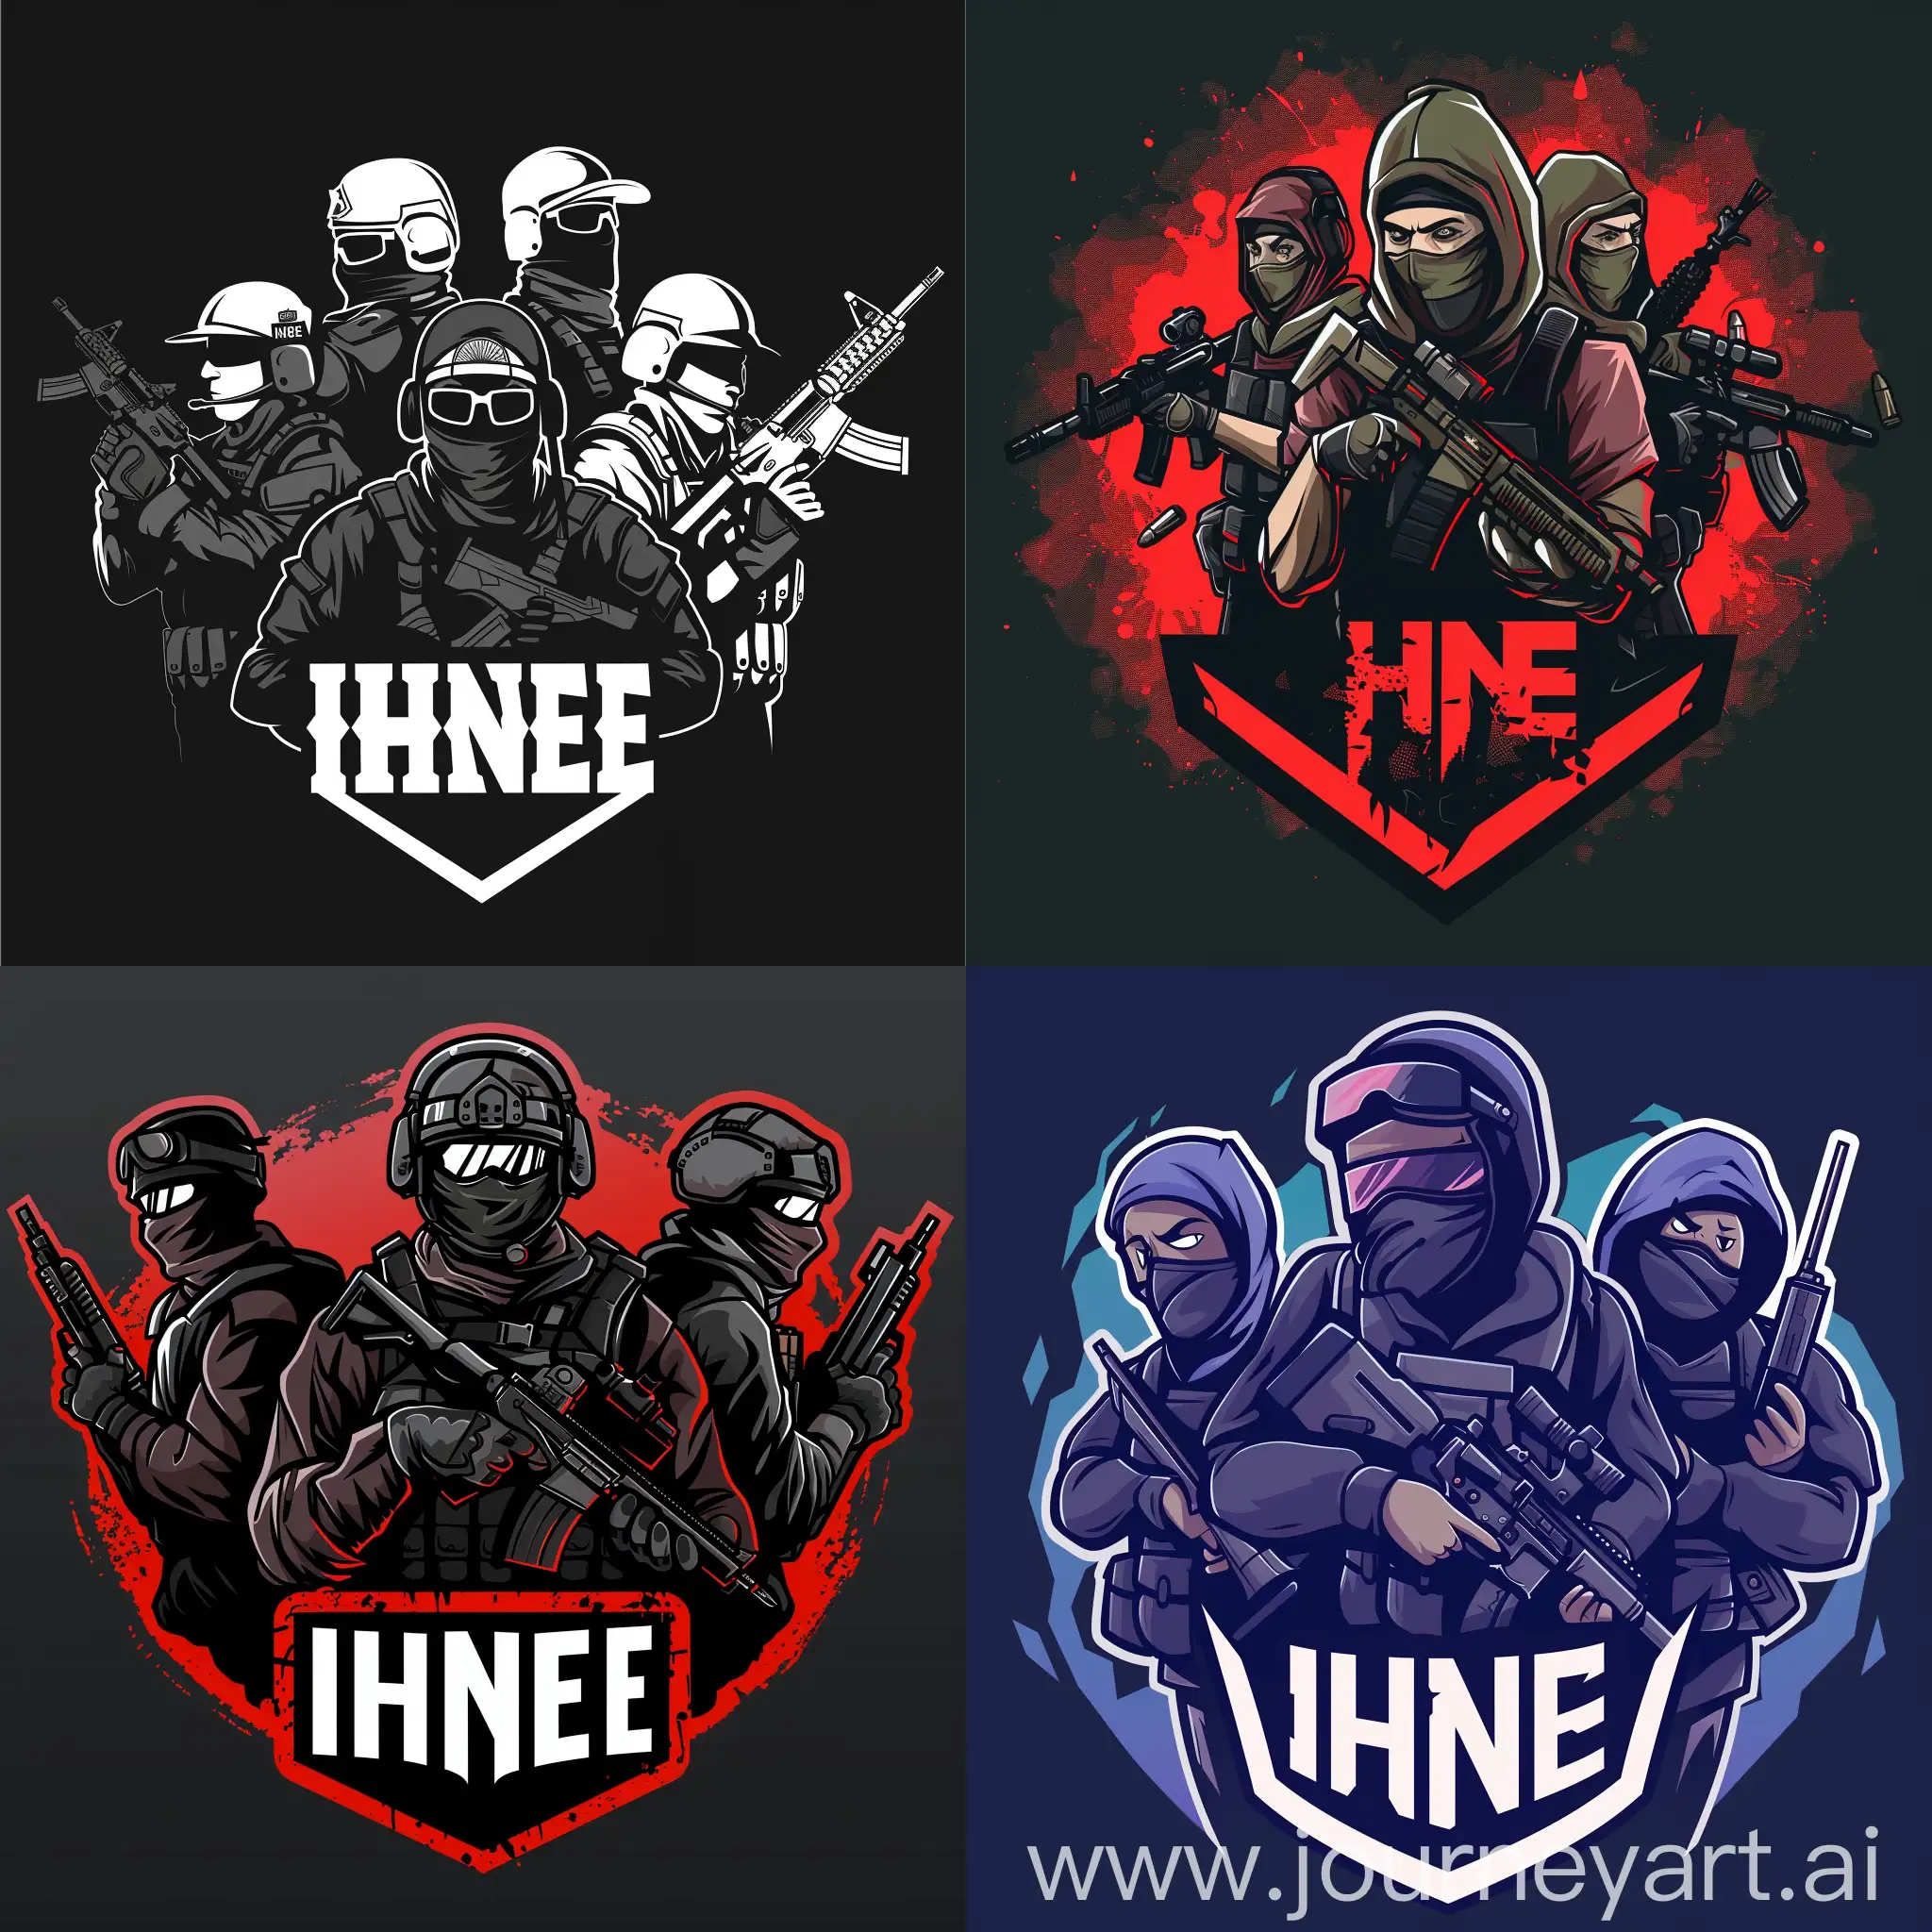 CS2-Shooter-Game-Team-Logo-with-IHNEE-Inscription-and-Armed-Terrorists